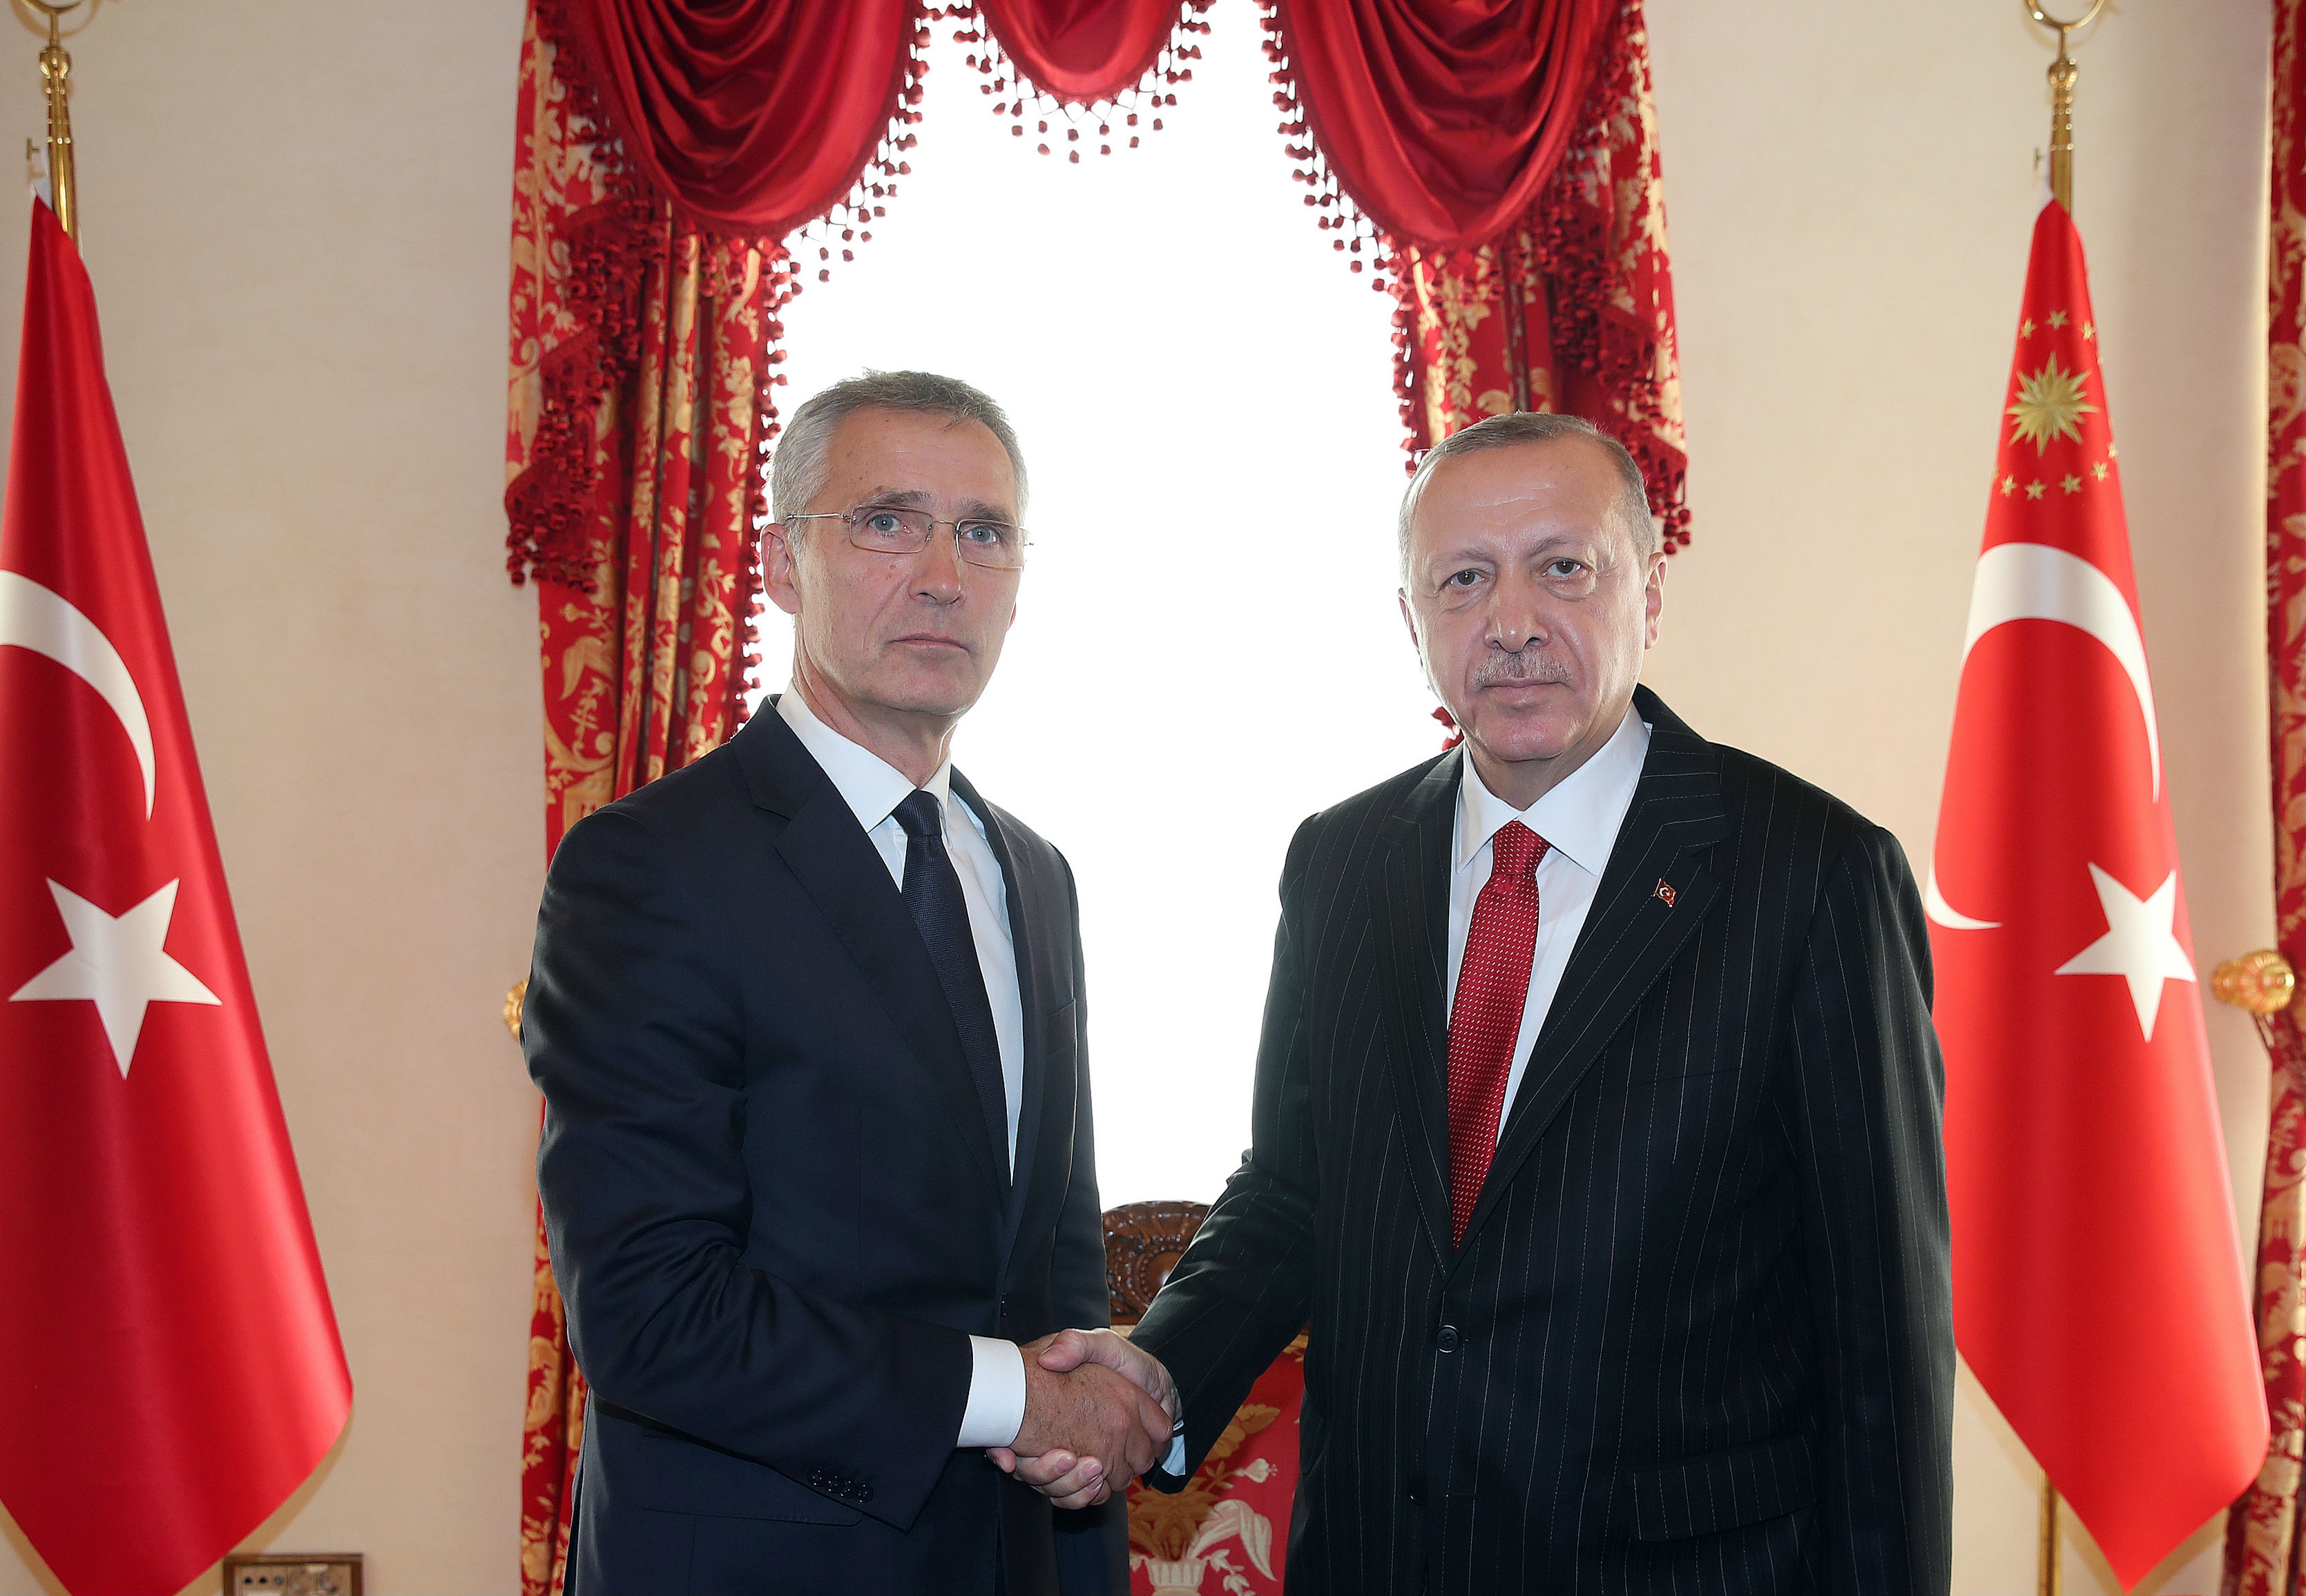 'I shared... my serious concerns about this ongoing operation and the risk of further destabilisation of the region,' said Stoltenberg, left (AFP/Turkish Presidential Press Service)